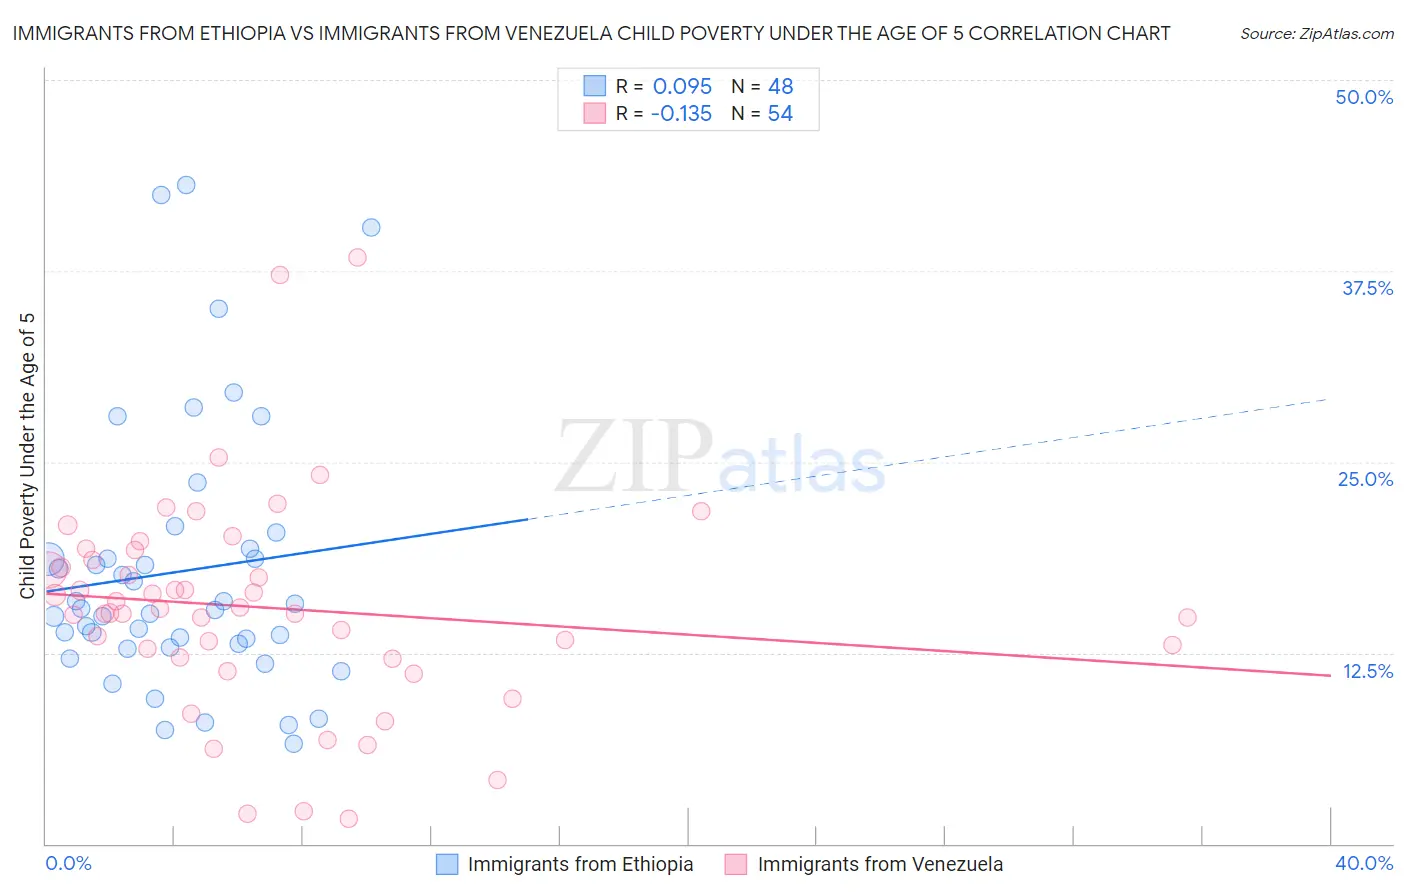 Immigrants from Ethiopia vs Immigrants from Venezuela Child Poverty Under the Age of 5